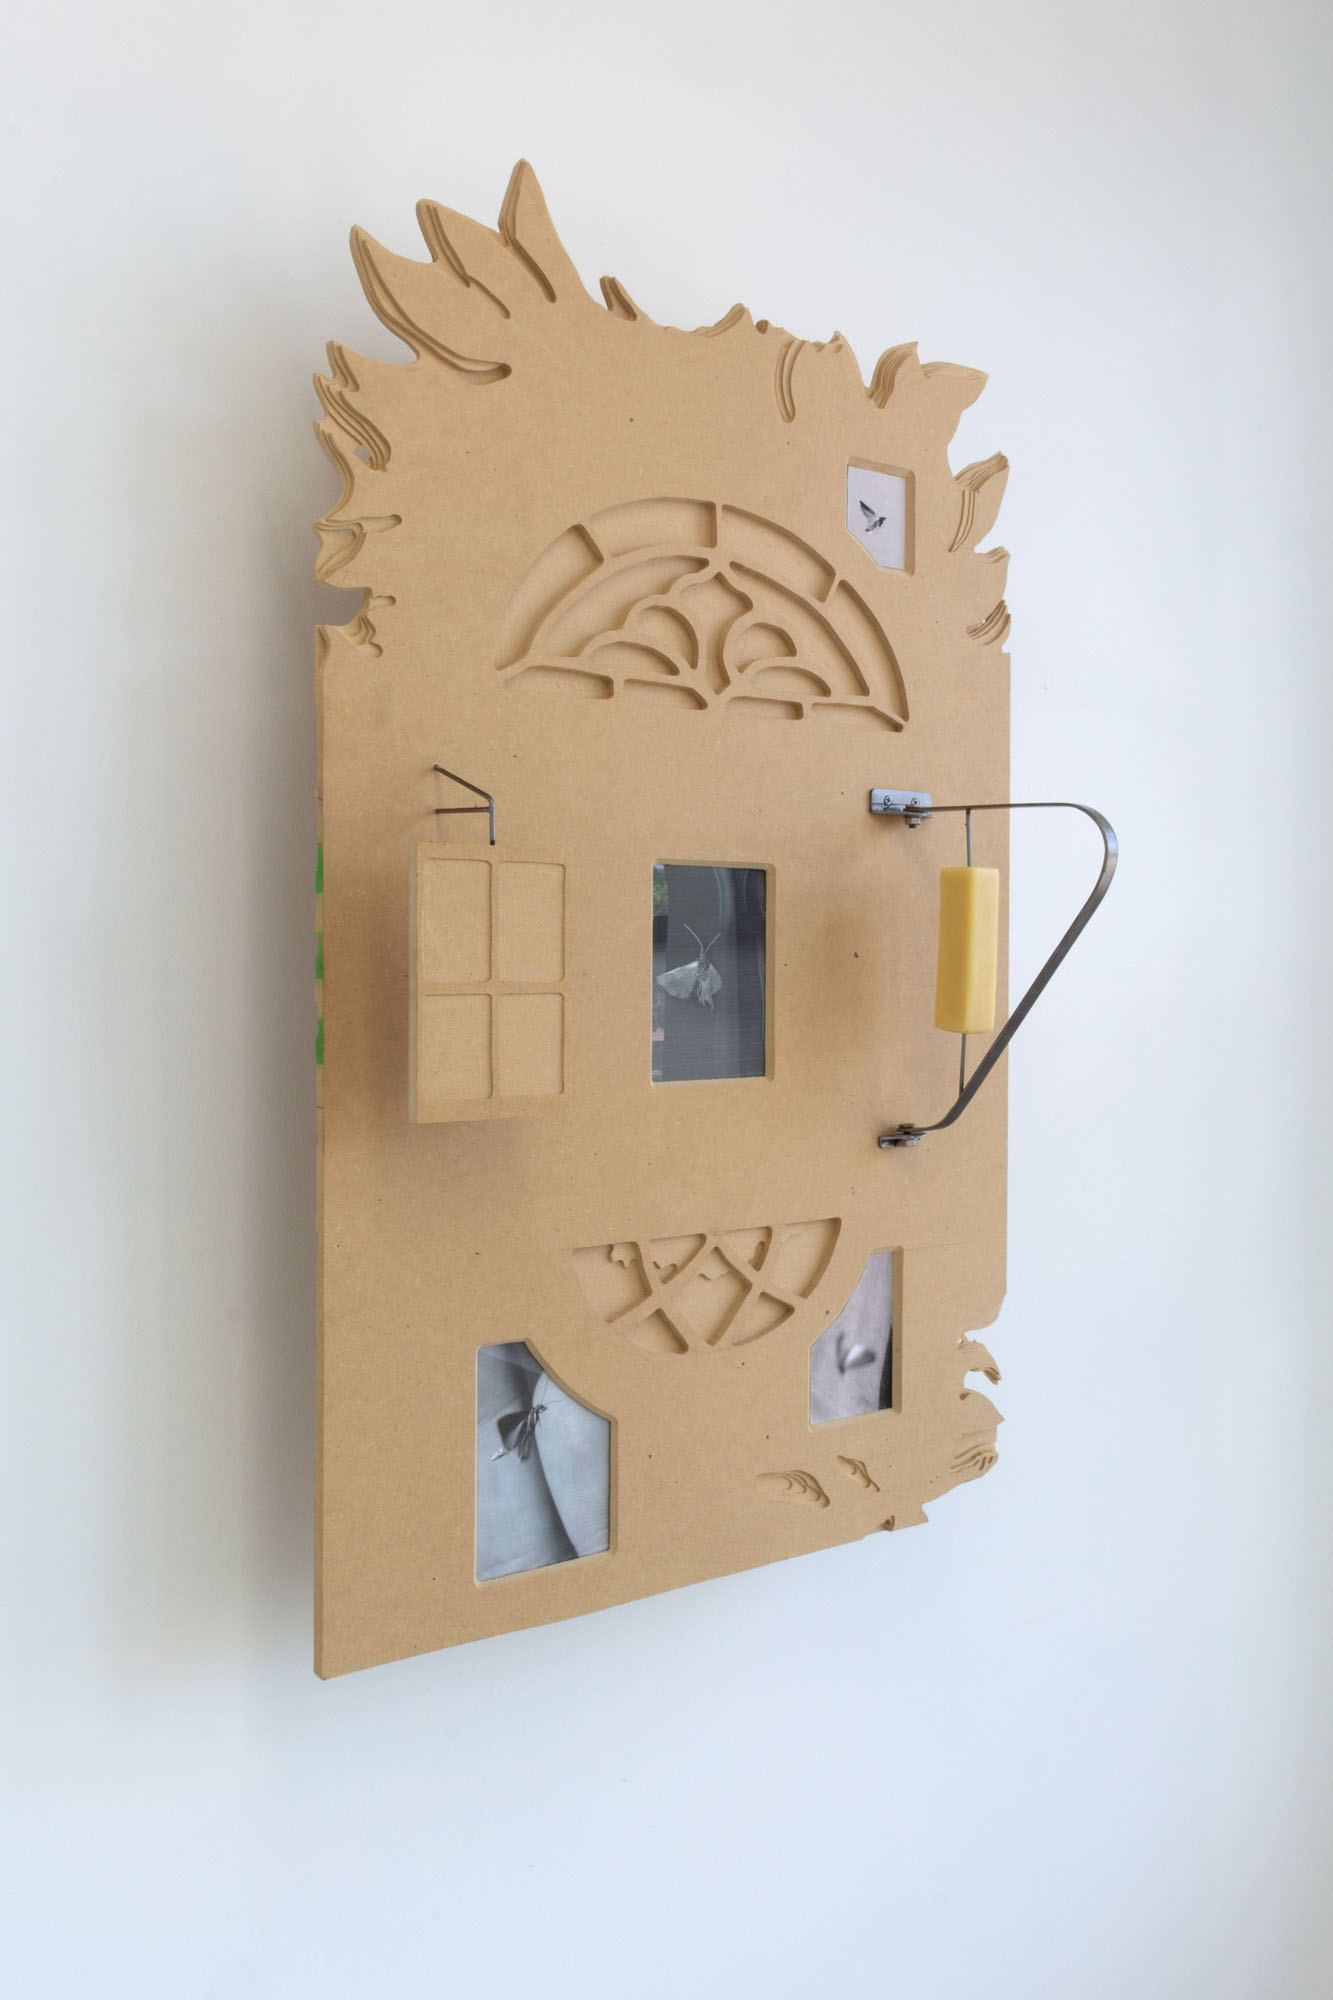 GREEN BELT — Group show at Jargon Projects, Chicago, US